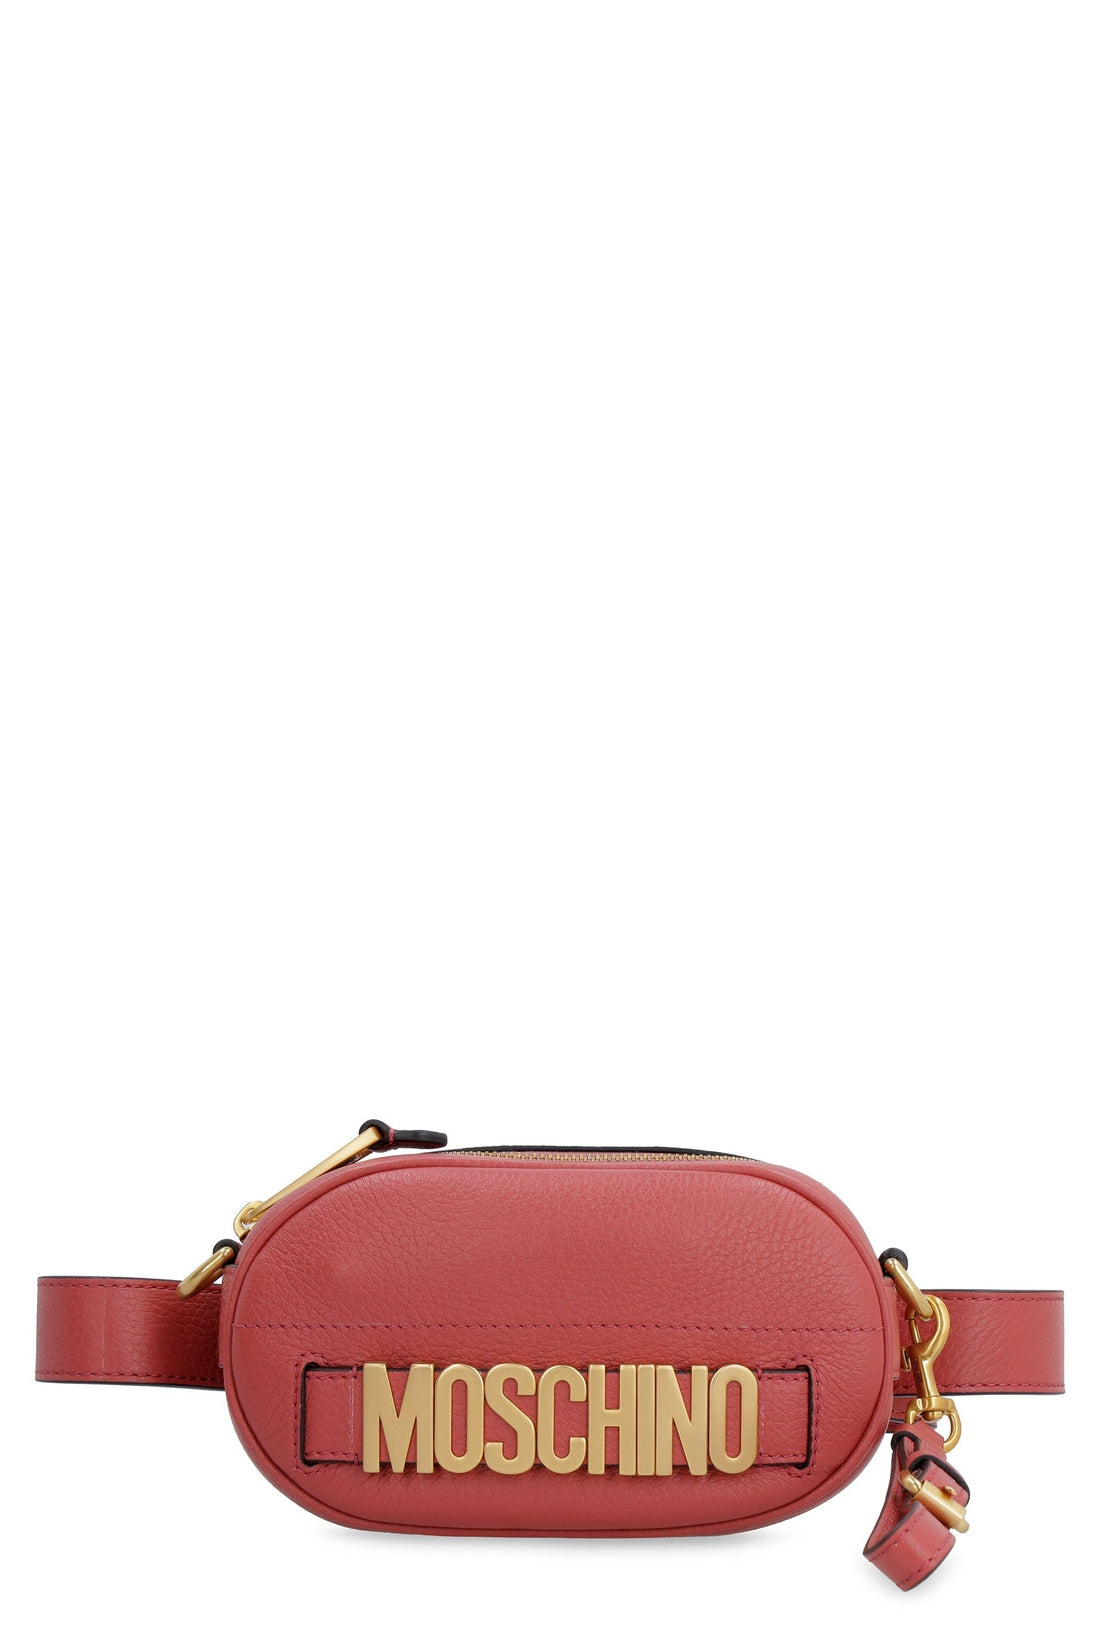 Moschino-OUTLET-SALE-Leather belt bag with logo-ARCHIVIST